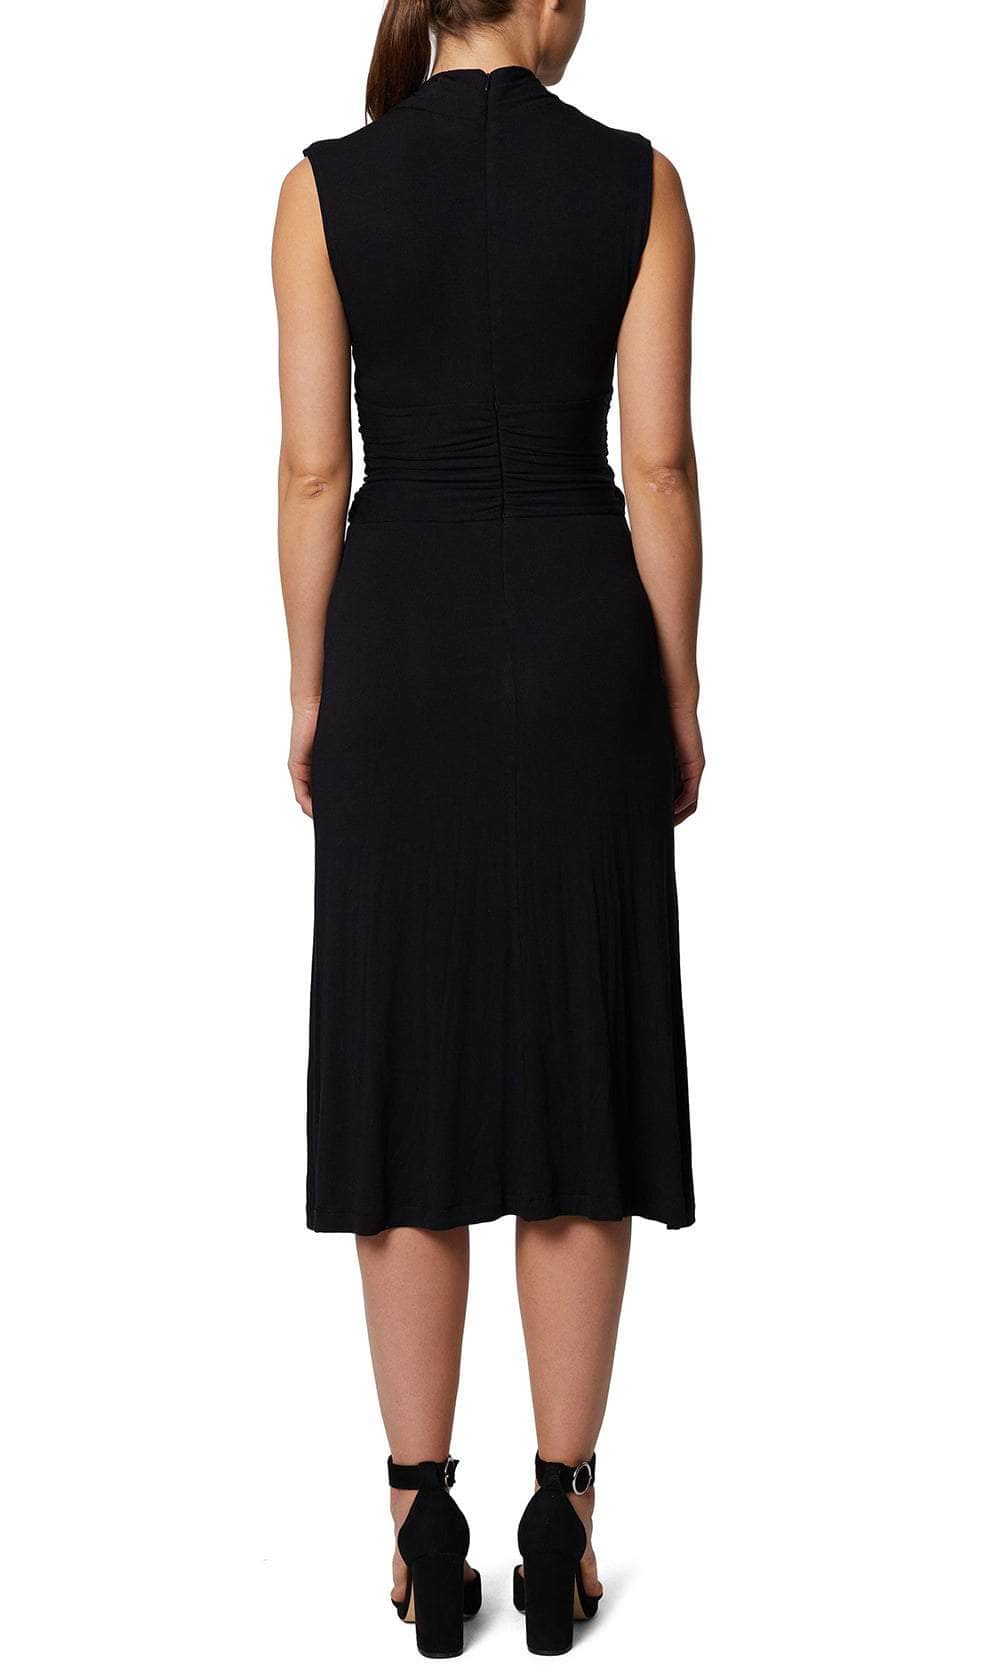 Laundry HU07D57 - Ruched Waist Formal Dress Cocktail Dresses